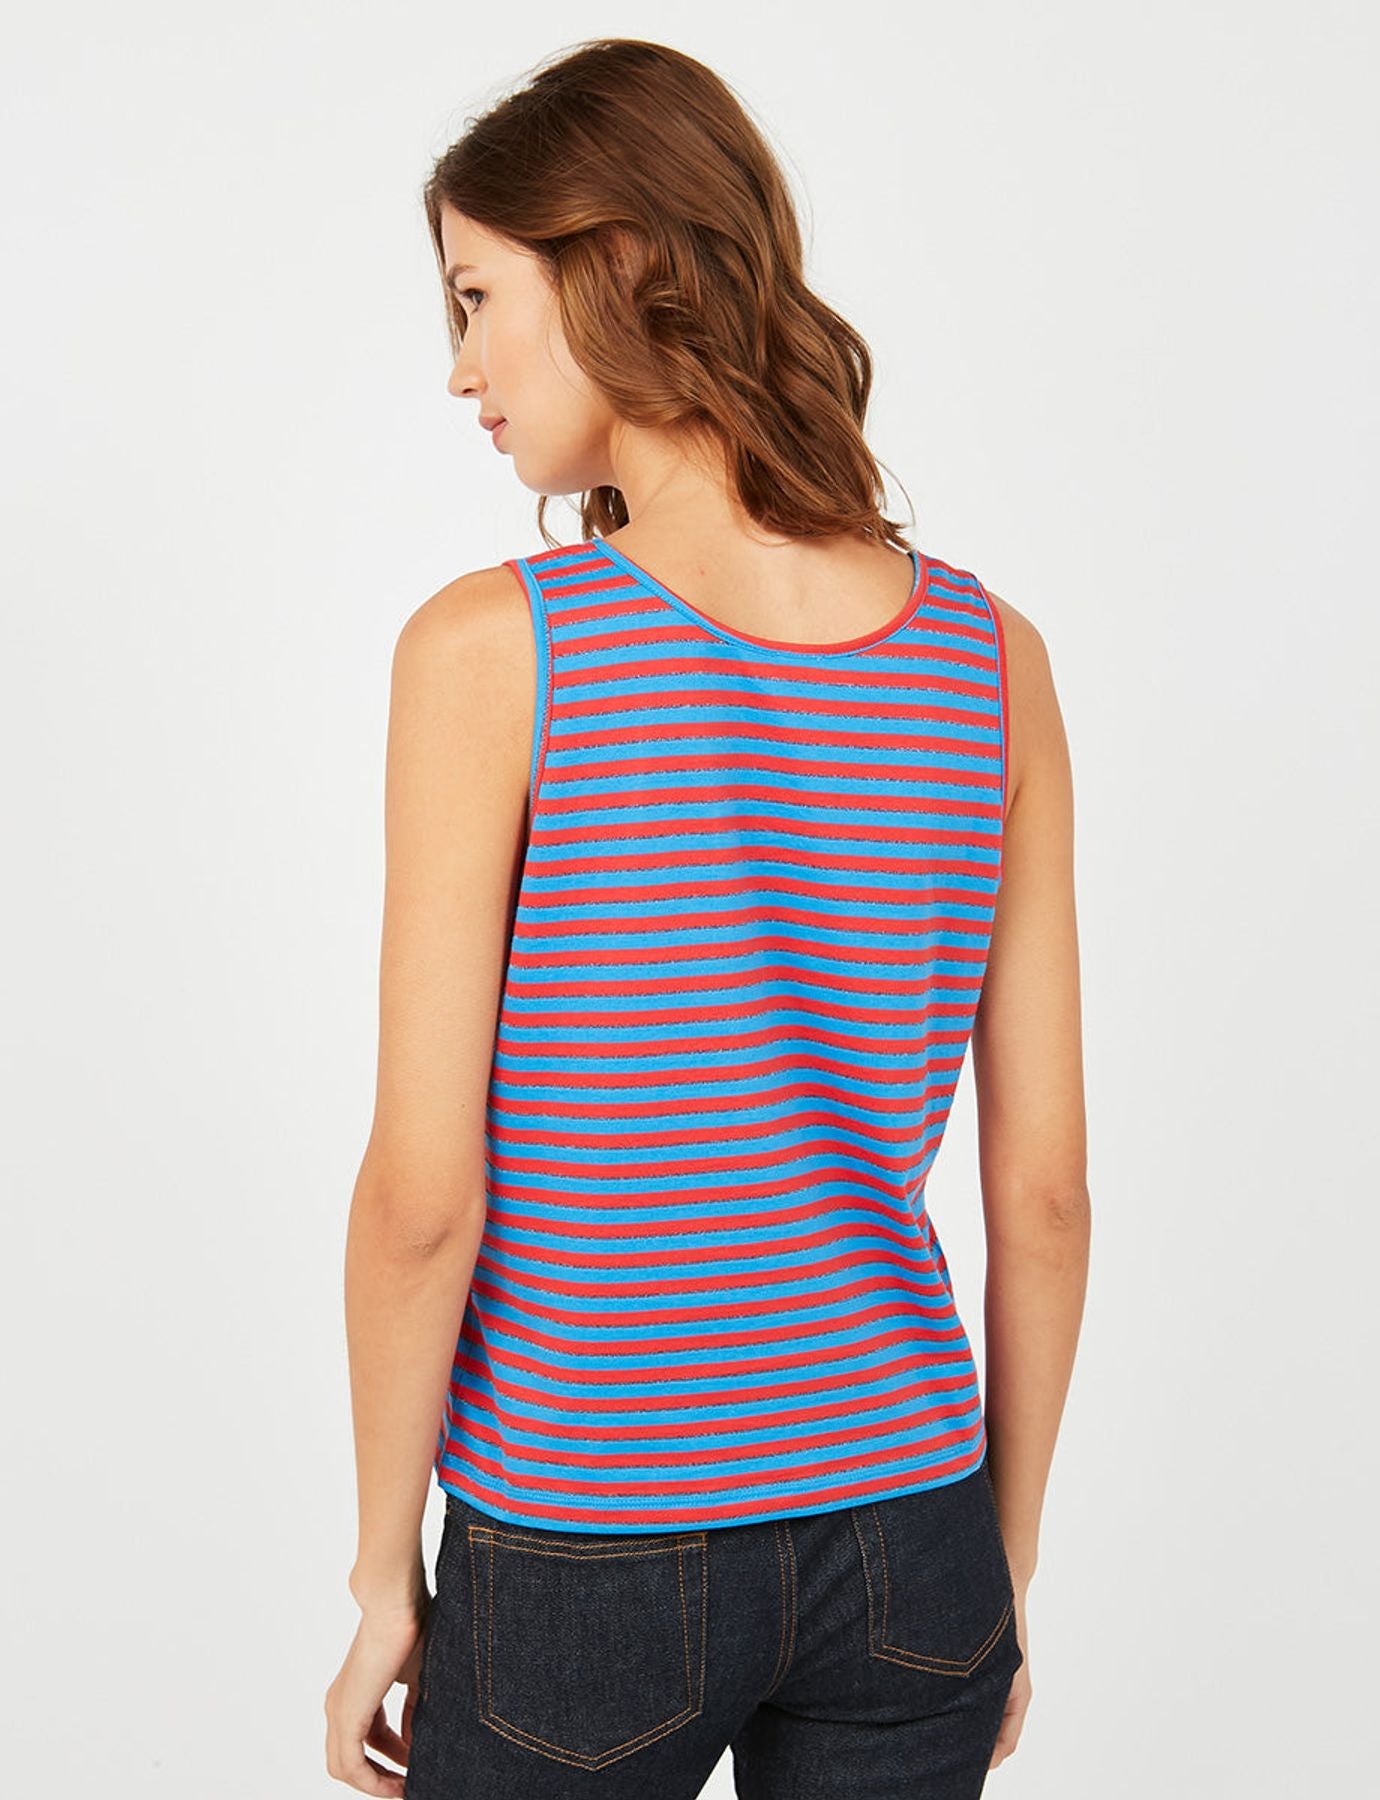 top-katalino-a-stripes-blue-and-red